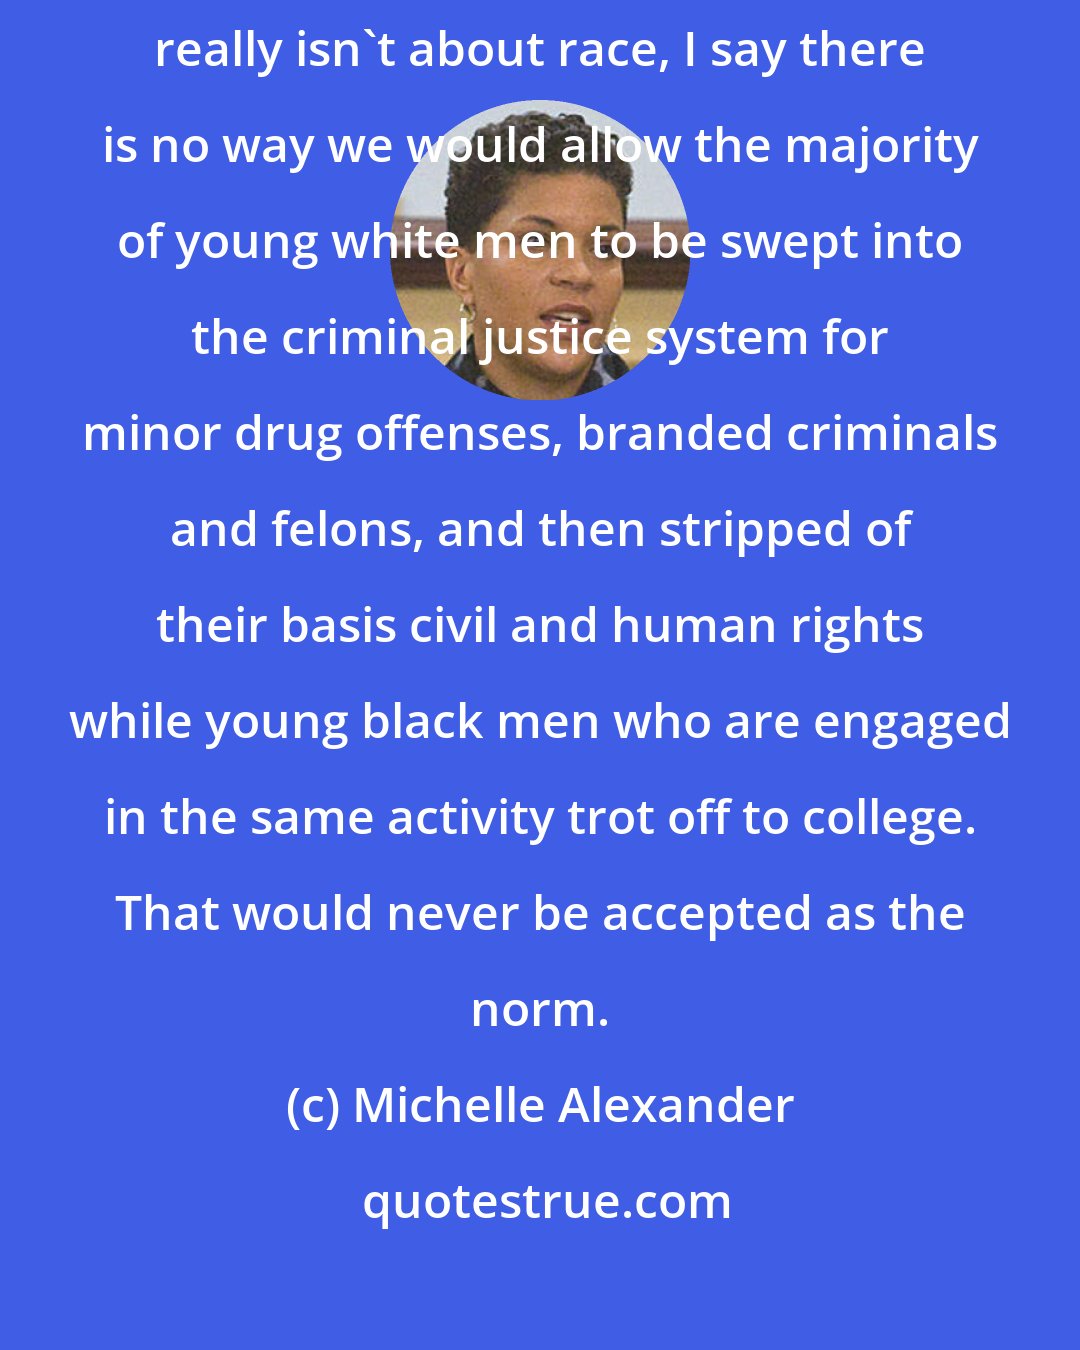 Michelle Alexander: For those who say that the war on drugs and the system of mass incarceration really isn't about race, I say there is no way we would allow the majority of young white men to be swept into the criminal justice system for minor drug offenses, branded criminals and felons, and then stripped of their basis civil and human rights while young black men who are engaged in the same activity trot off to college. That would never be accepted as the norm.